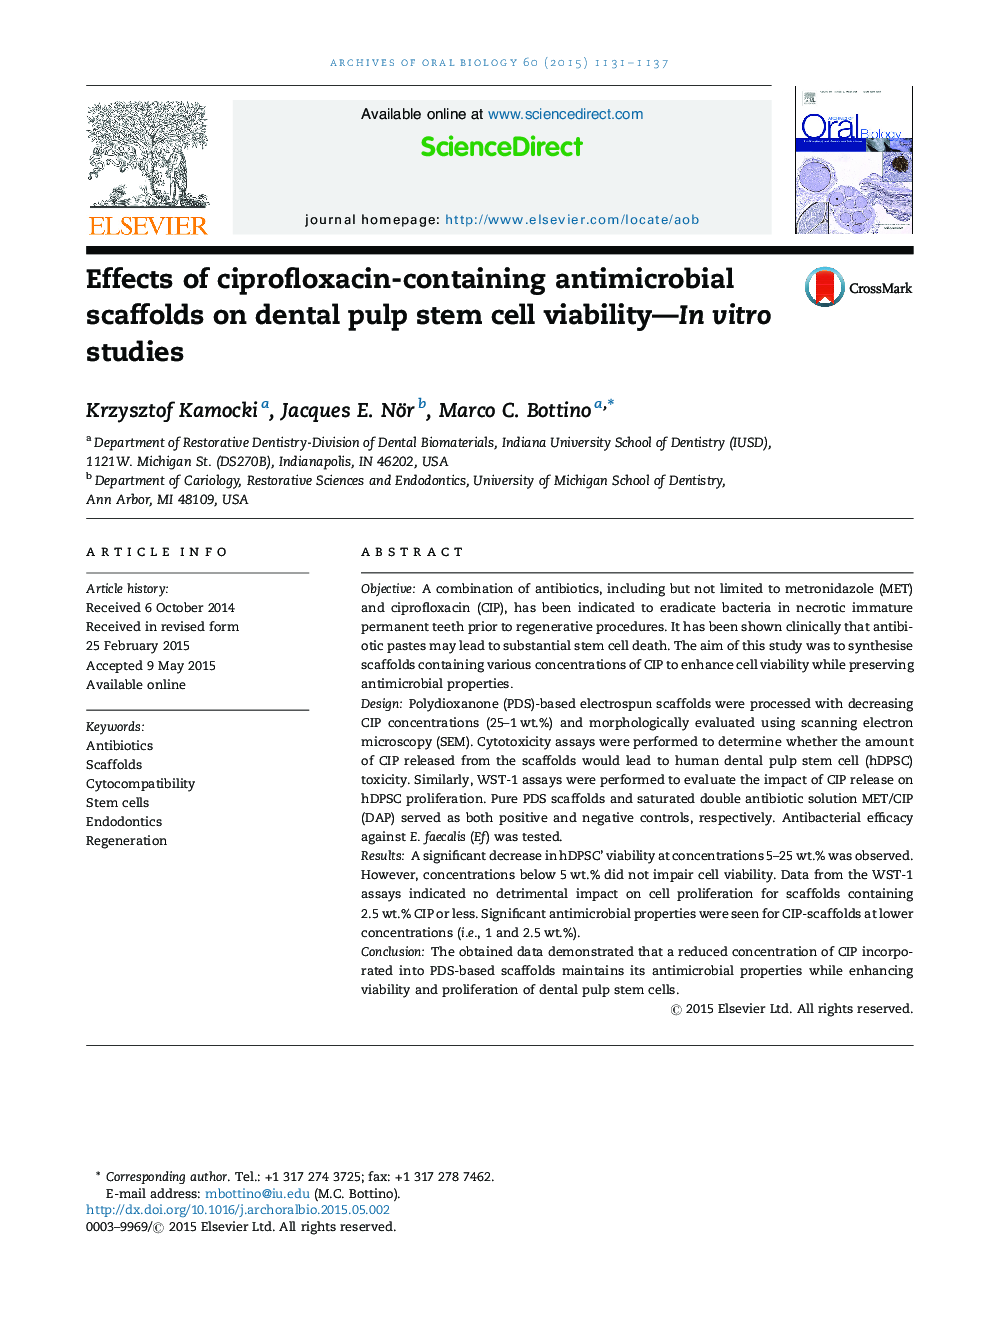 Effects of ciprofloxacin-containing antimicrobial scaffolds on dental pulp stem cell viability—In vitro studies